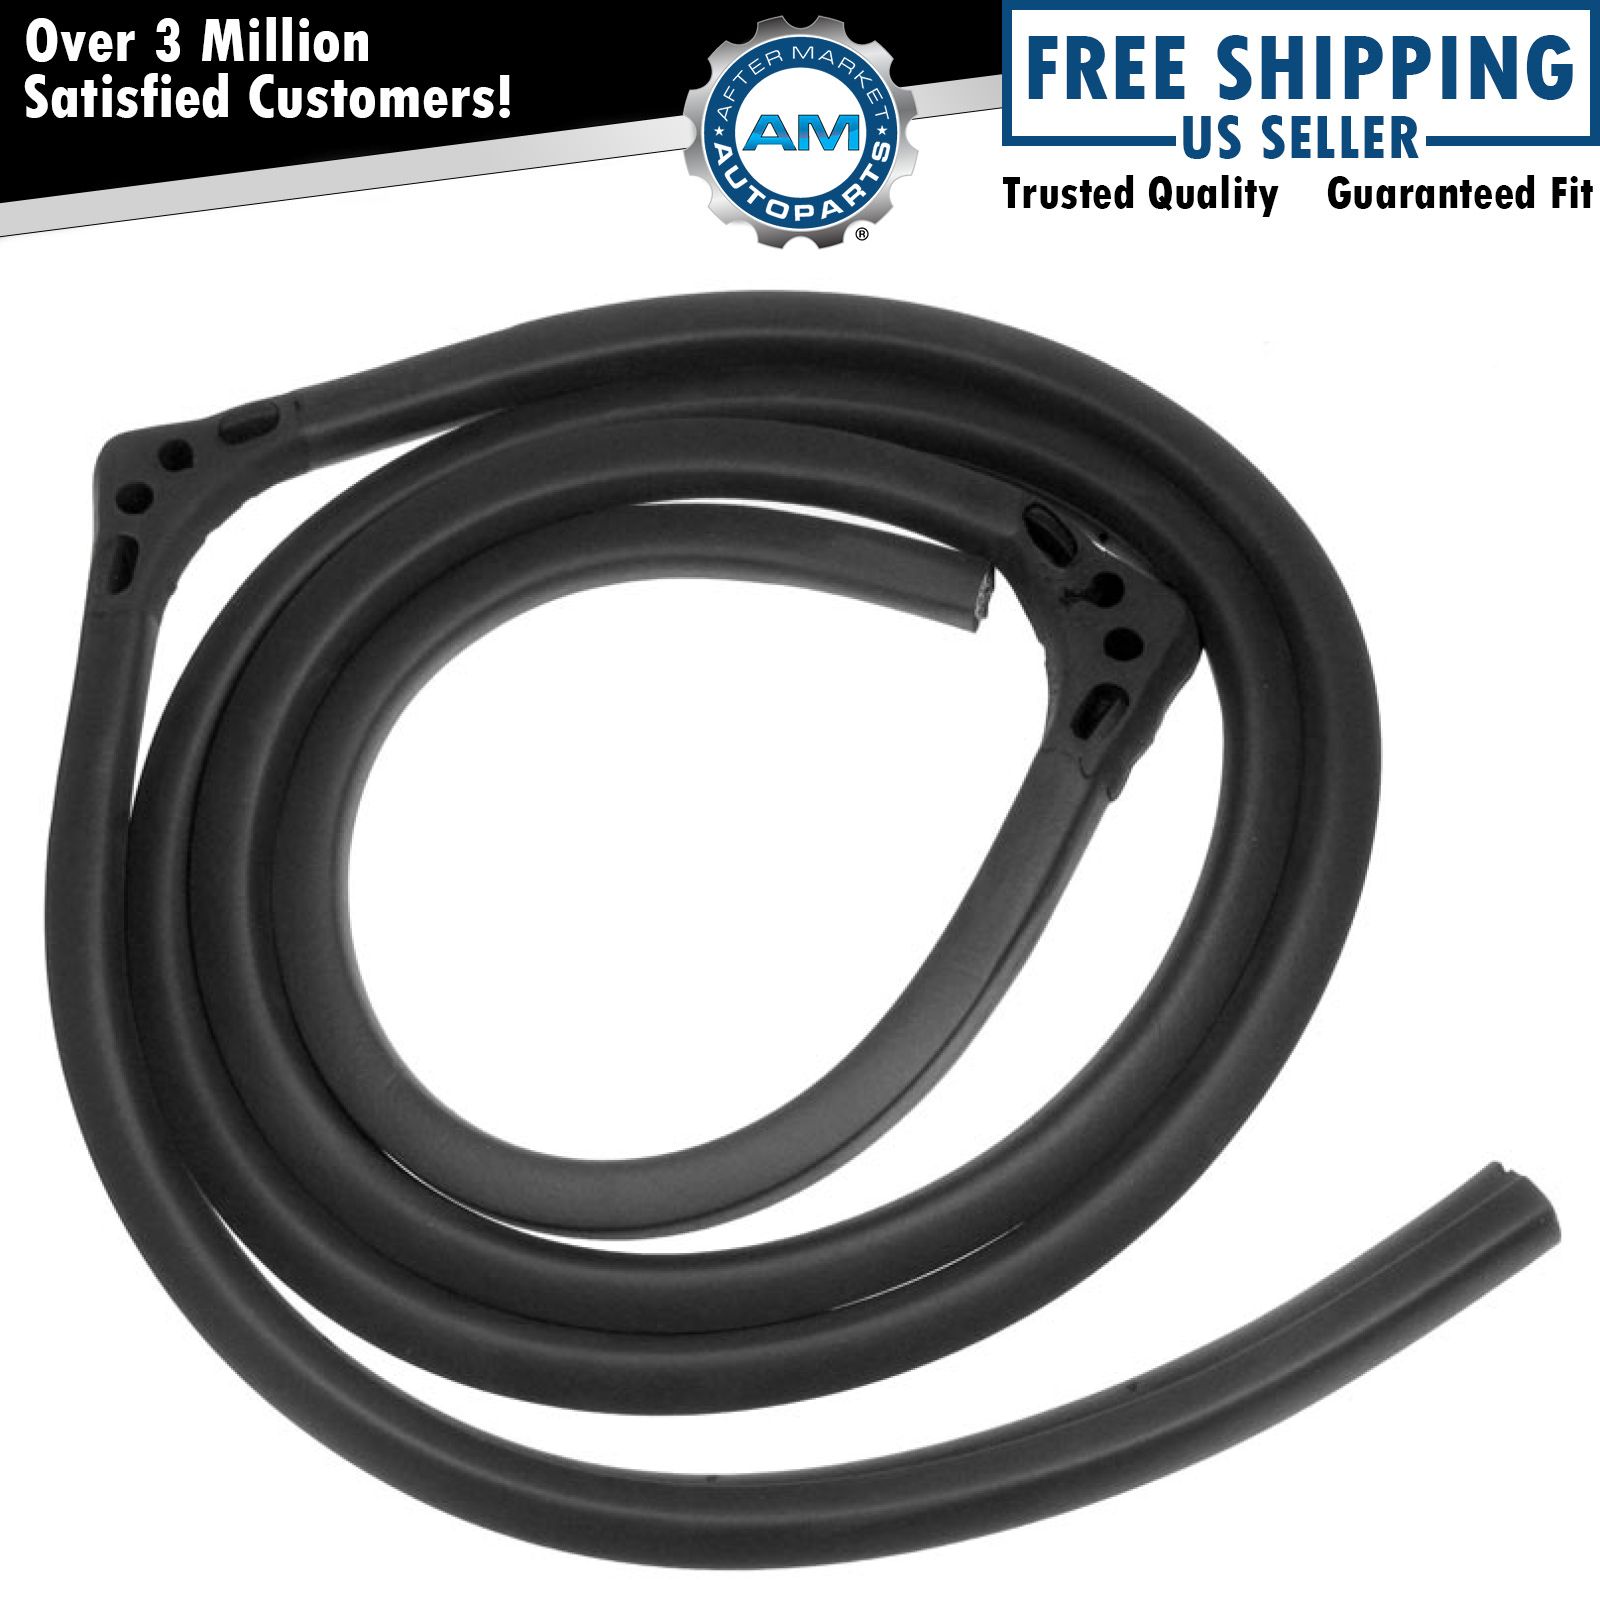 Tail Gate Tailgate Weatherstrip Seal Rubber for 73-91 Chevy Blazer GMC Jimmy